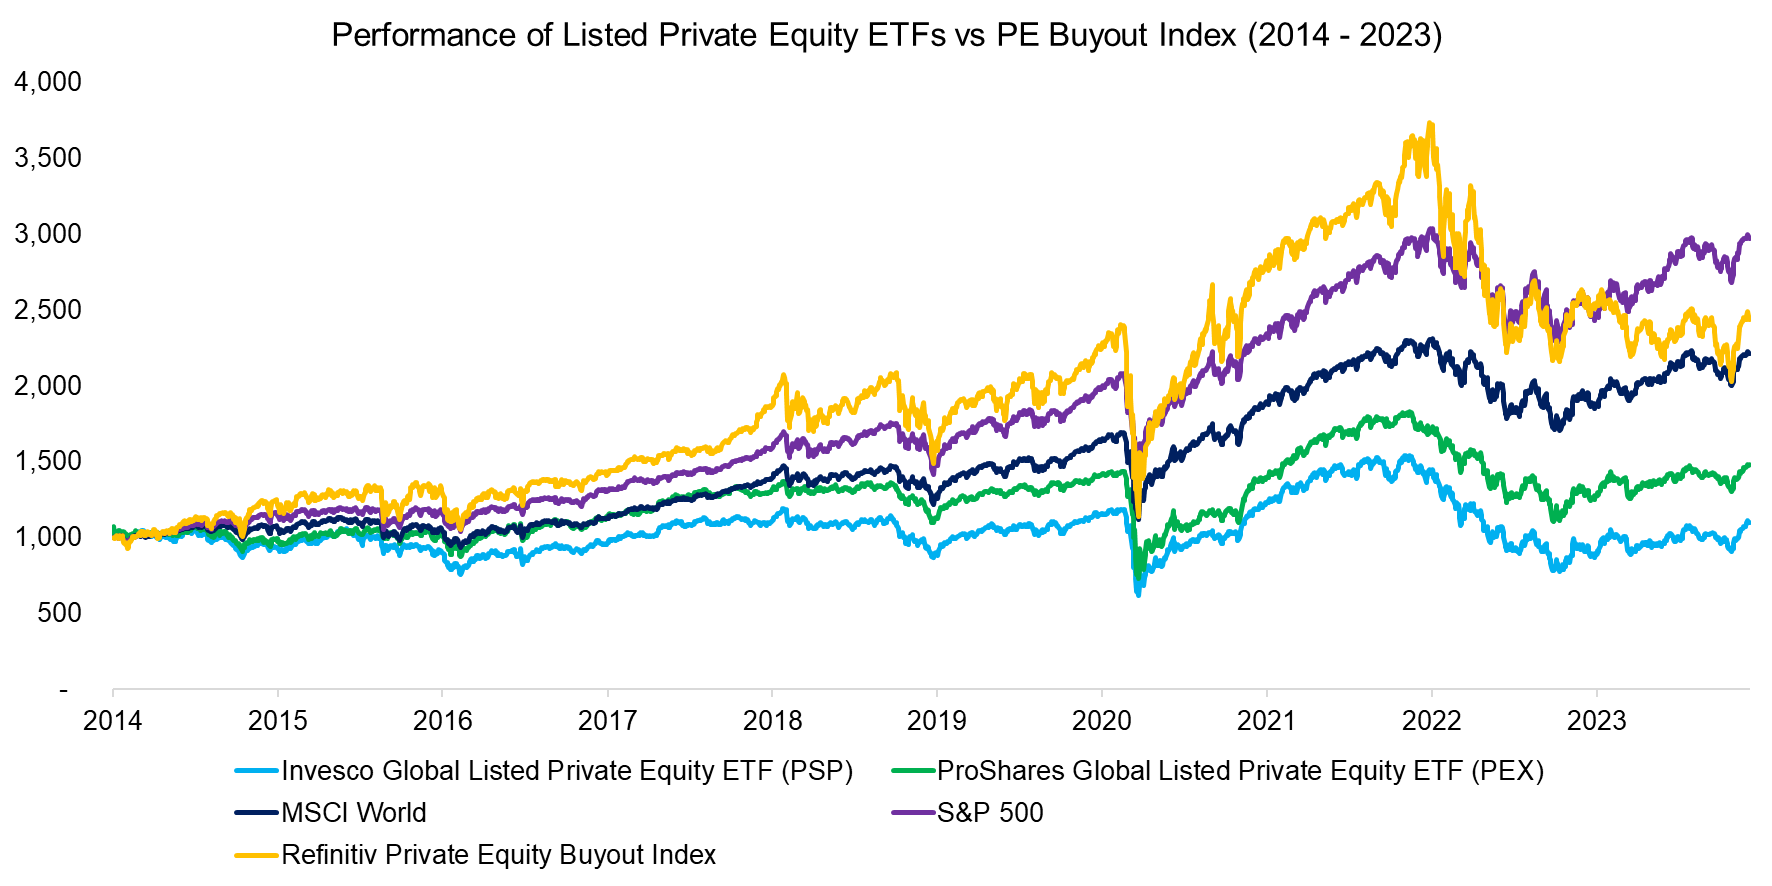 Performance of Listed Private Equity ETFs vs PE Buyout Index (2014 - 2023)